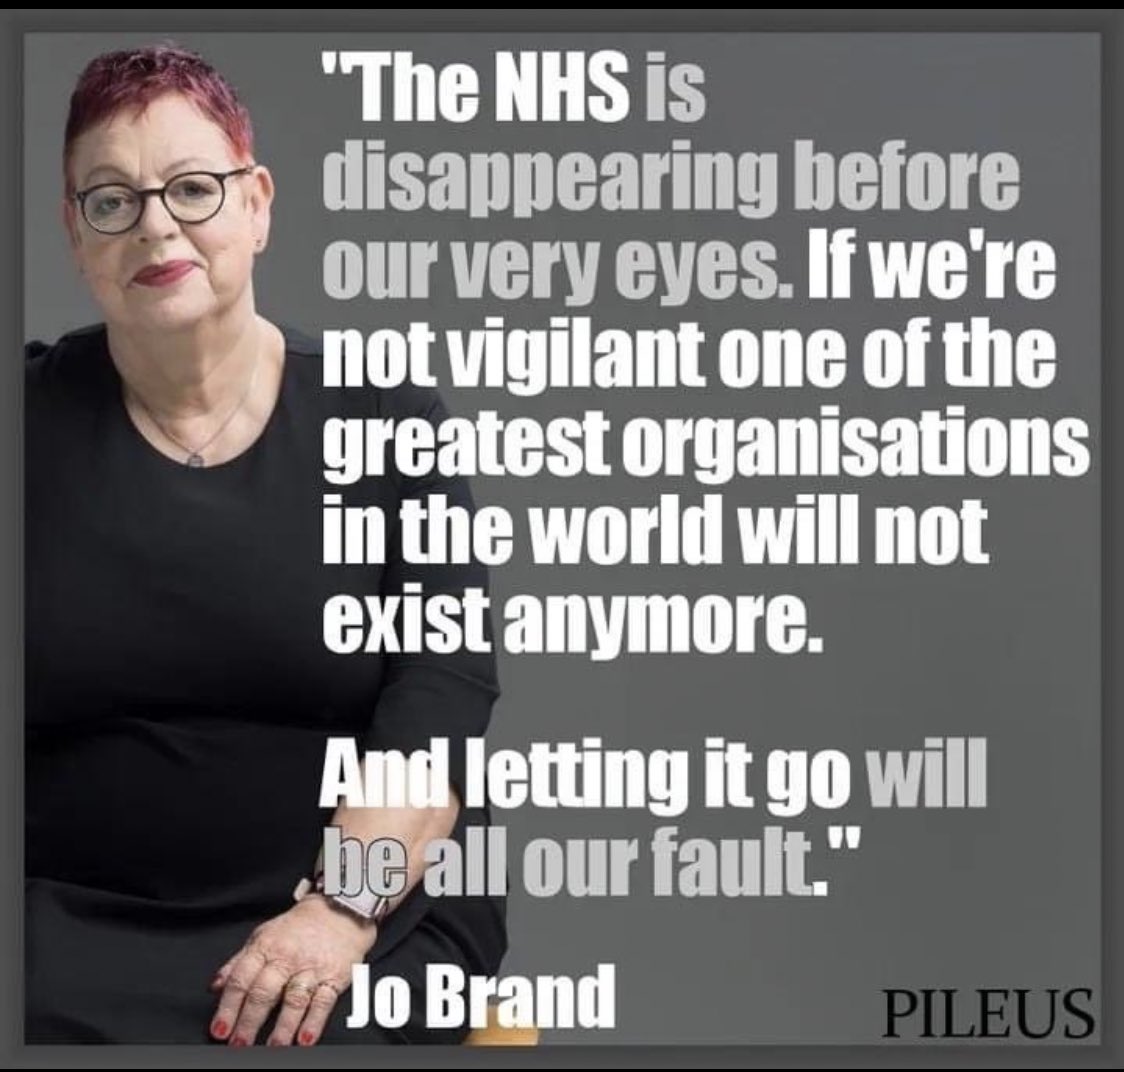 #followbackFriday #SaveOurNHS 
#GTTO 
Another week revealing more corruption & wrongdoing in Gov
Tragic to see the callous disregard and lack of compassion of this farce of a gov
Let’s connect if you think NHS is worth fighting for